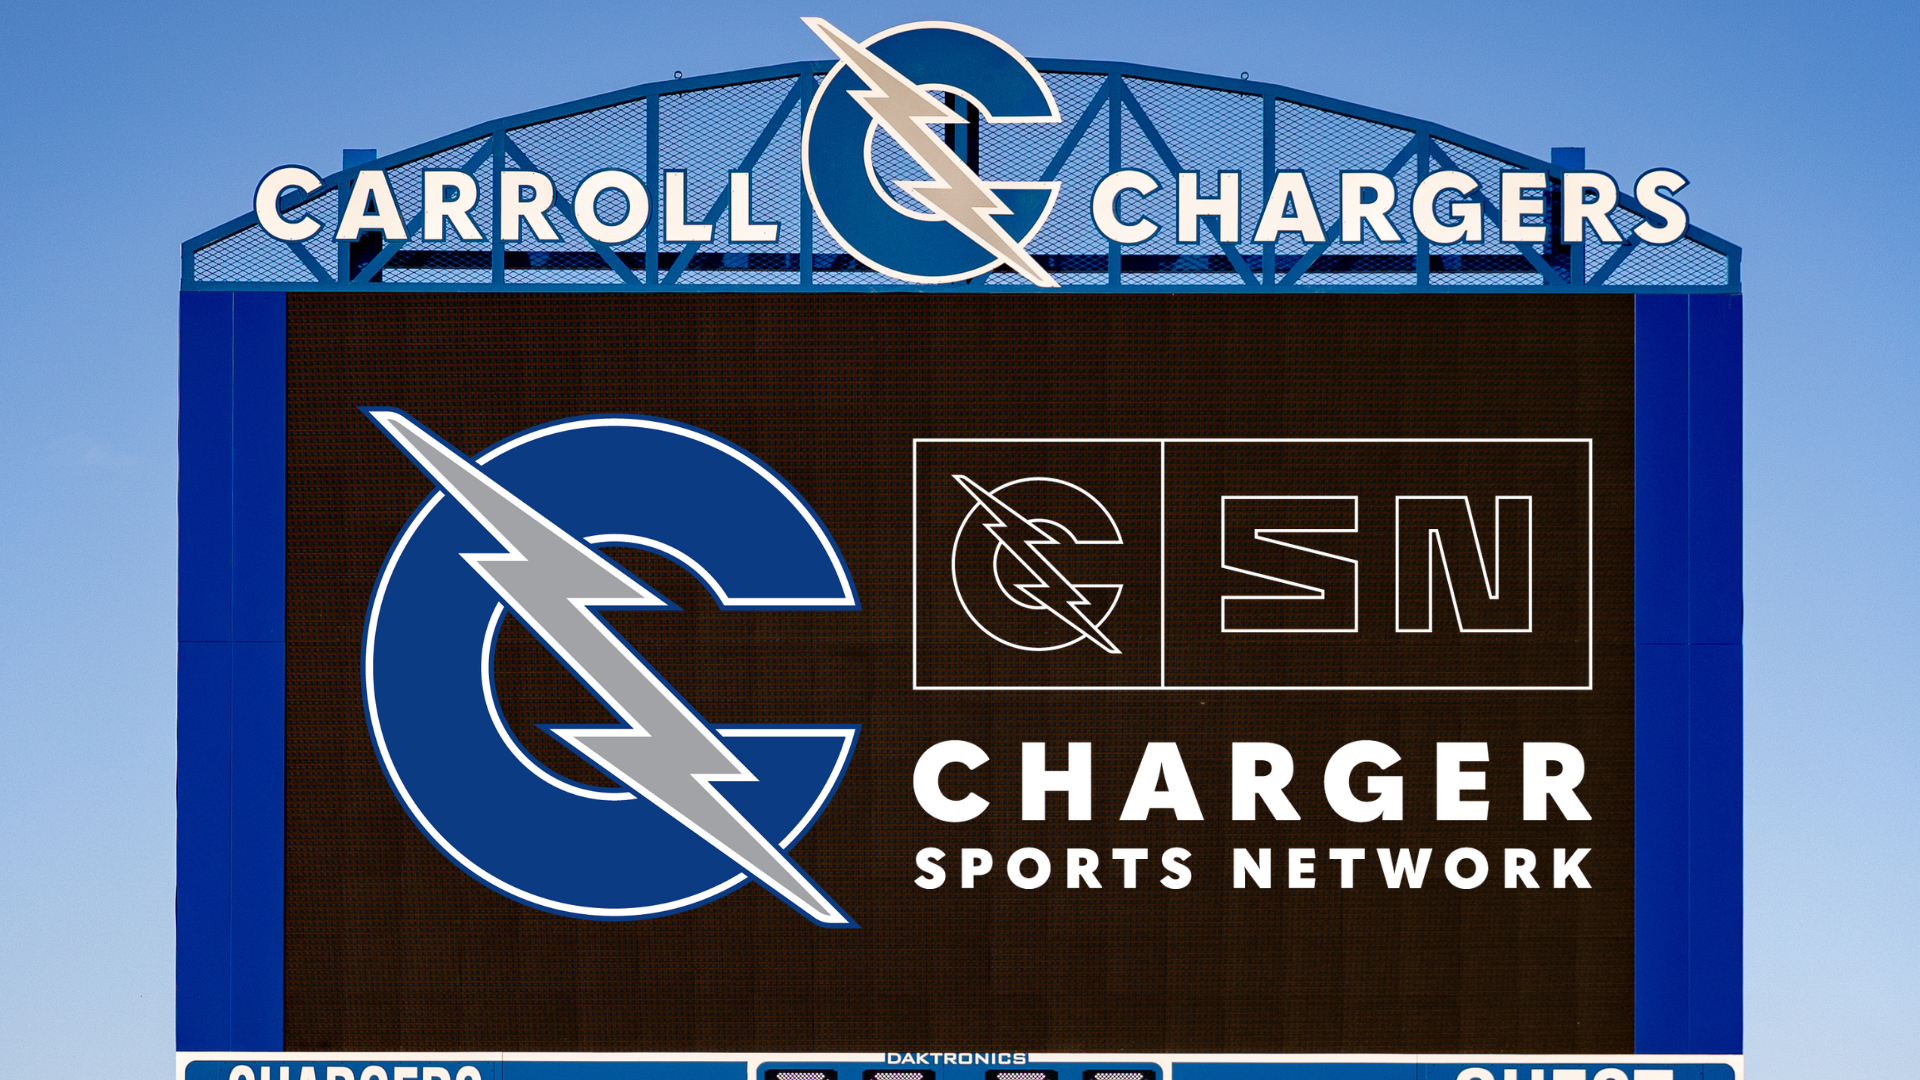 Charger Stadium Gets Even Better